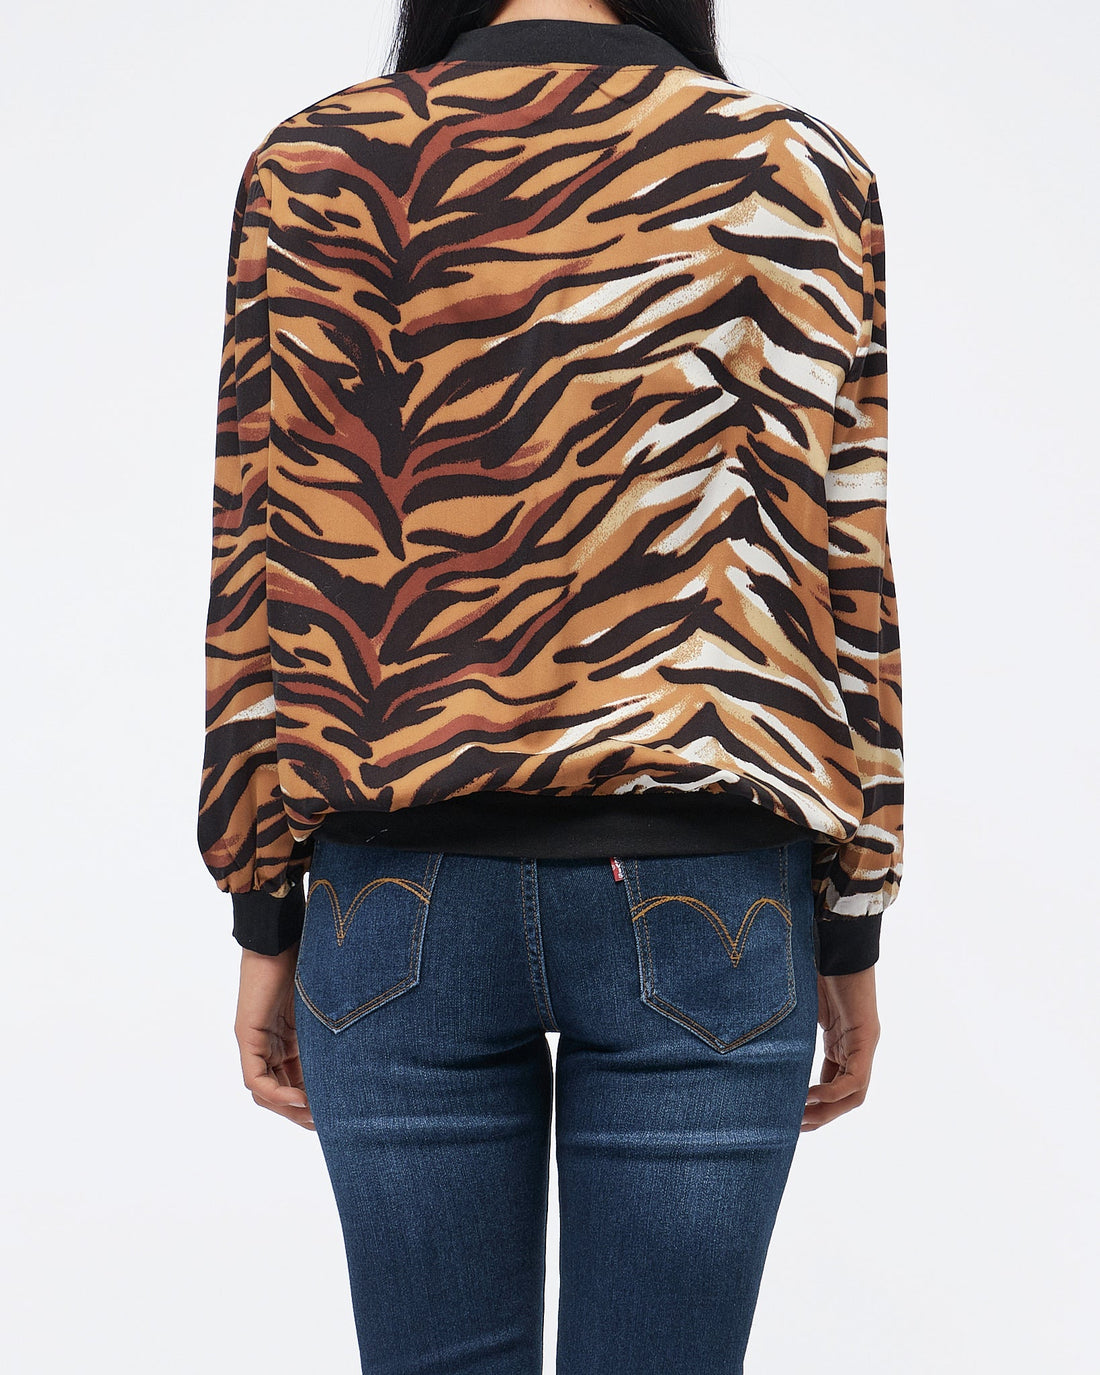 MOI OUTFIT-Tiger Skin Pattern Lady Jacket 17.90